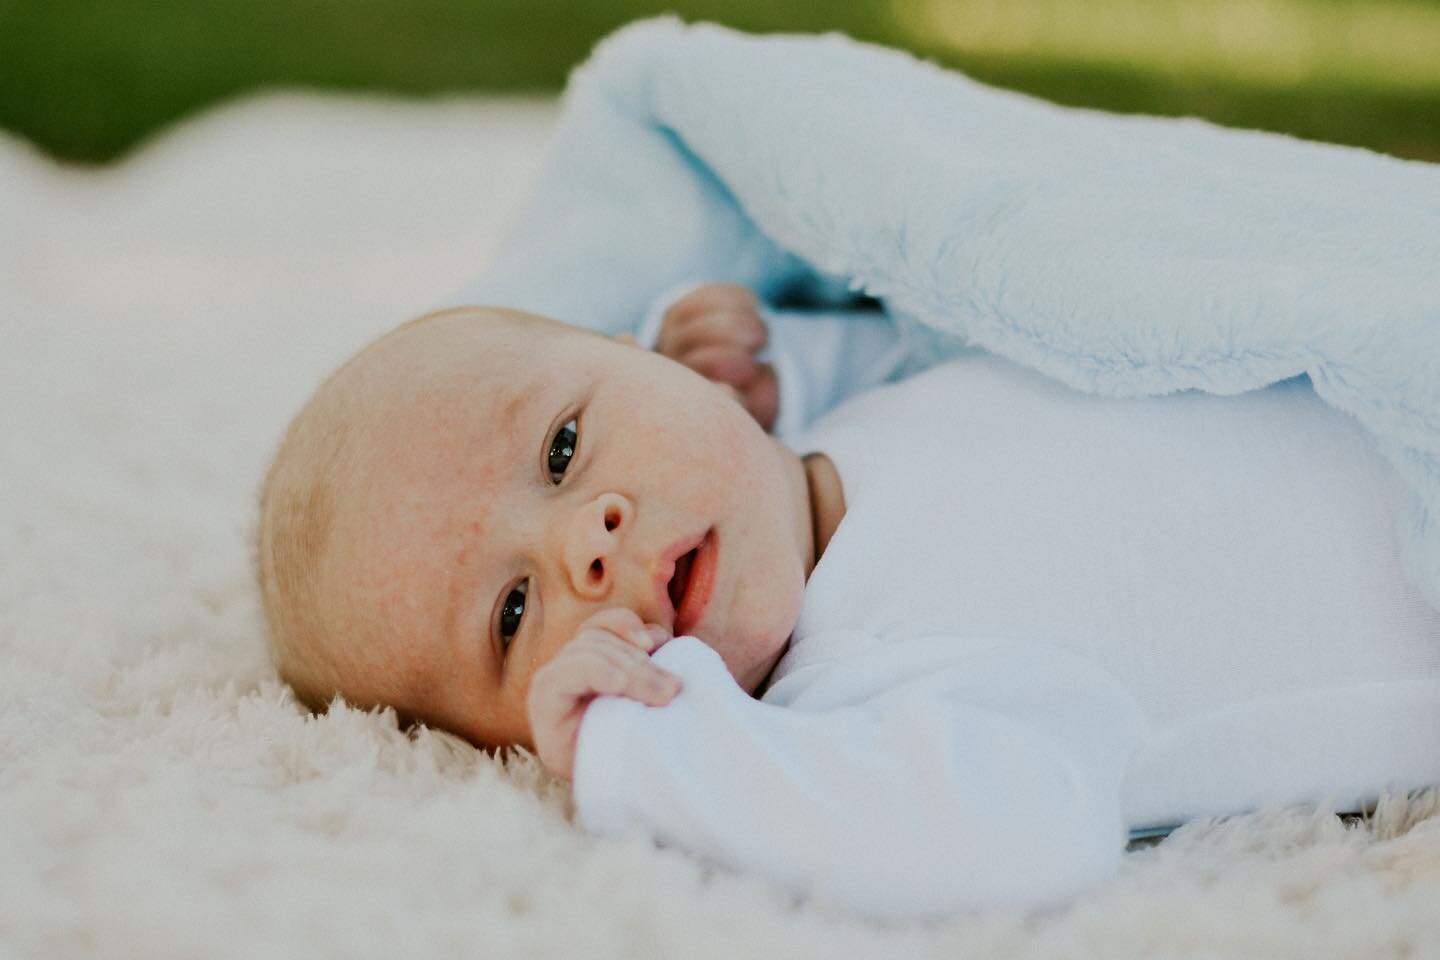 Does this picture give anyone else baby fever? Just me? 😂 newborn sessions are the BEST! 
.
.
.
.
.
.
🏷 
#colorado #denver #coloradophotographer #coloradophotography #denverphotographer #denverfamilyphotographer #coloradofamilyphotographer #newborn